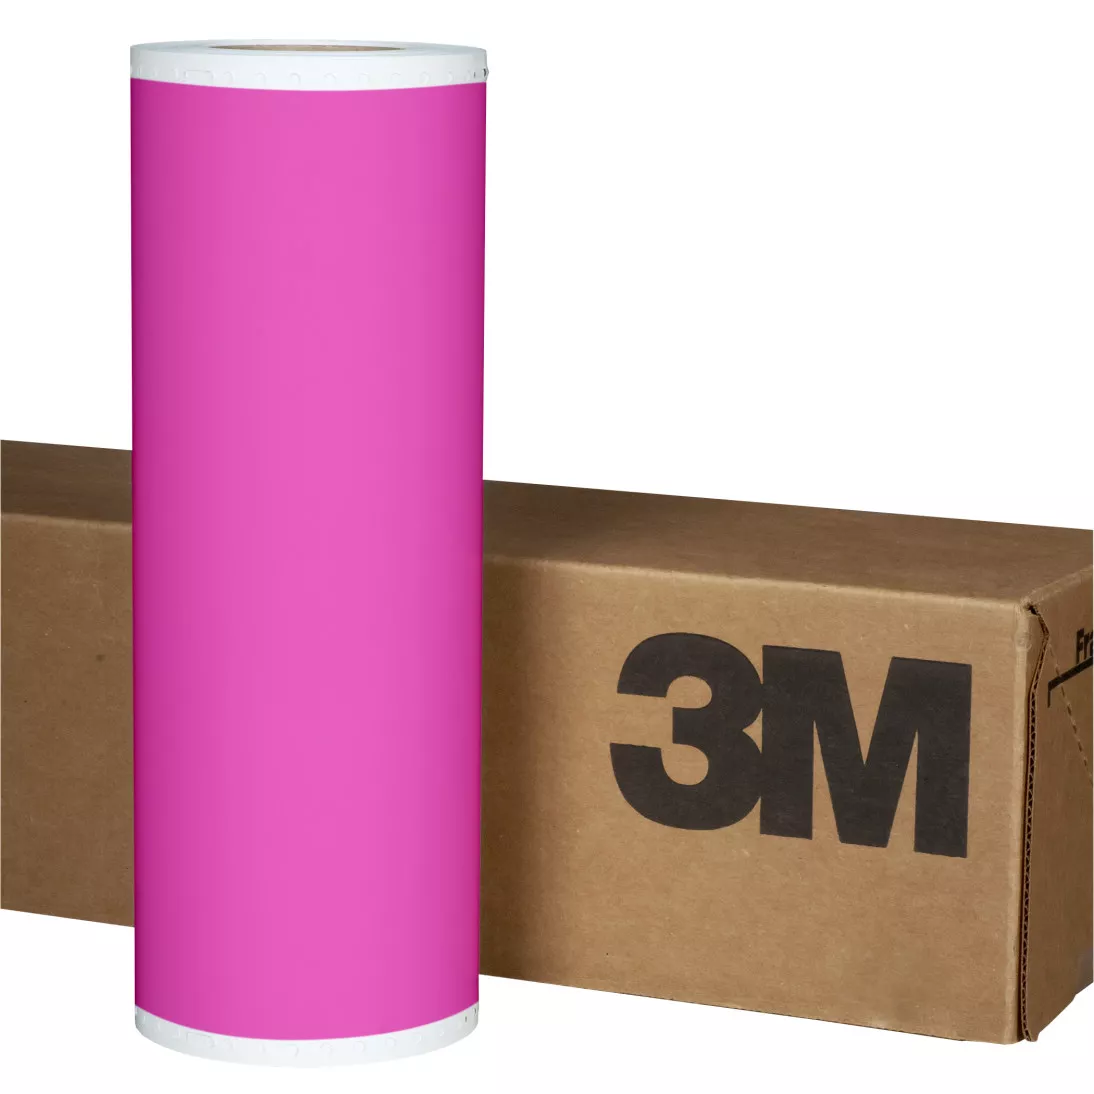 3M™ Scotchcal™ Translucent Graphic Film 3630-1091, Pink, 48 in x 10 yd